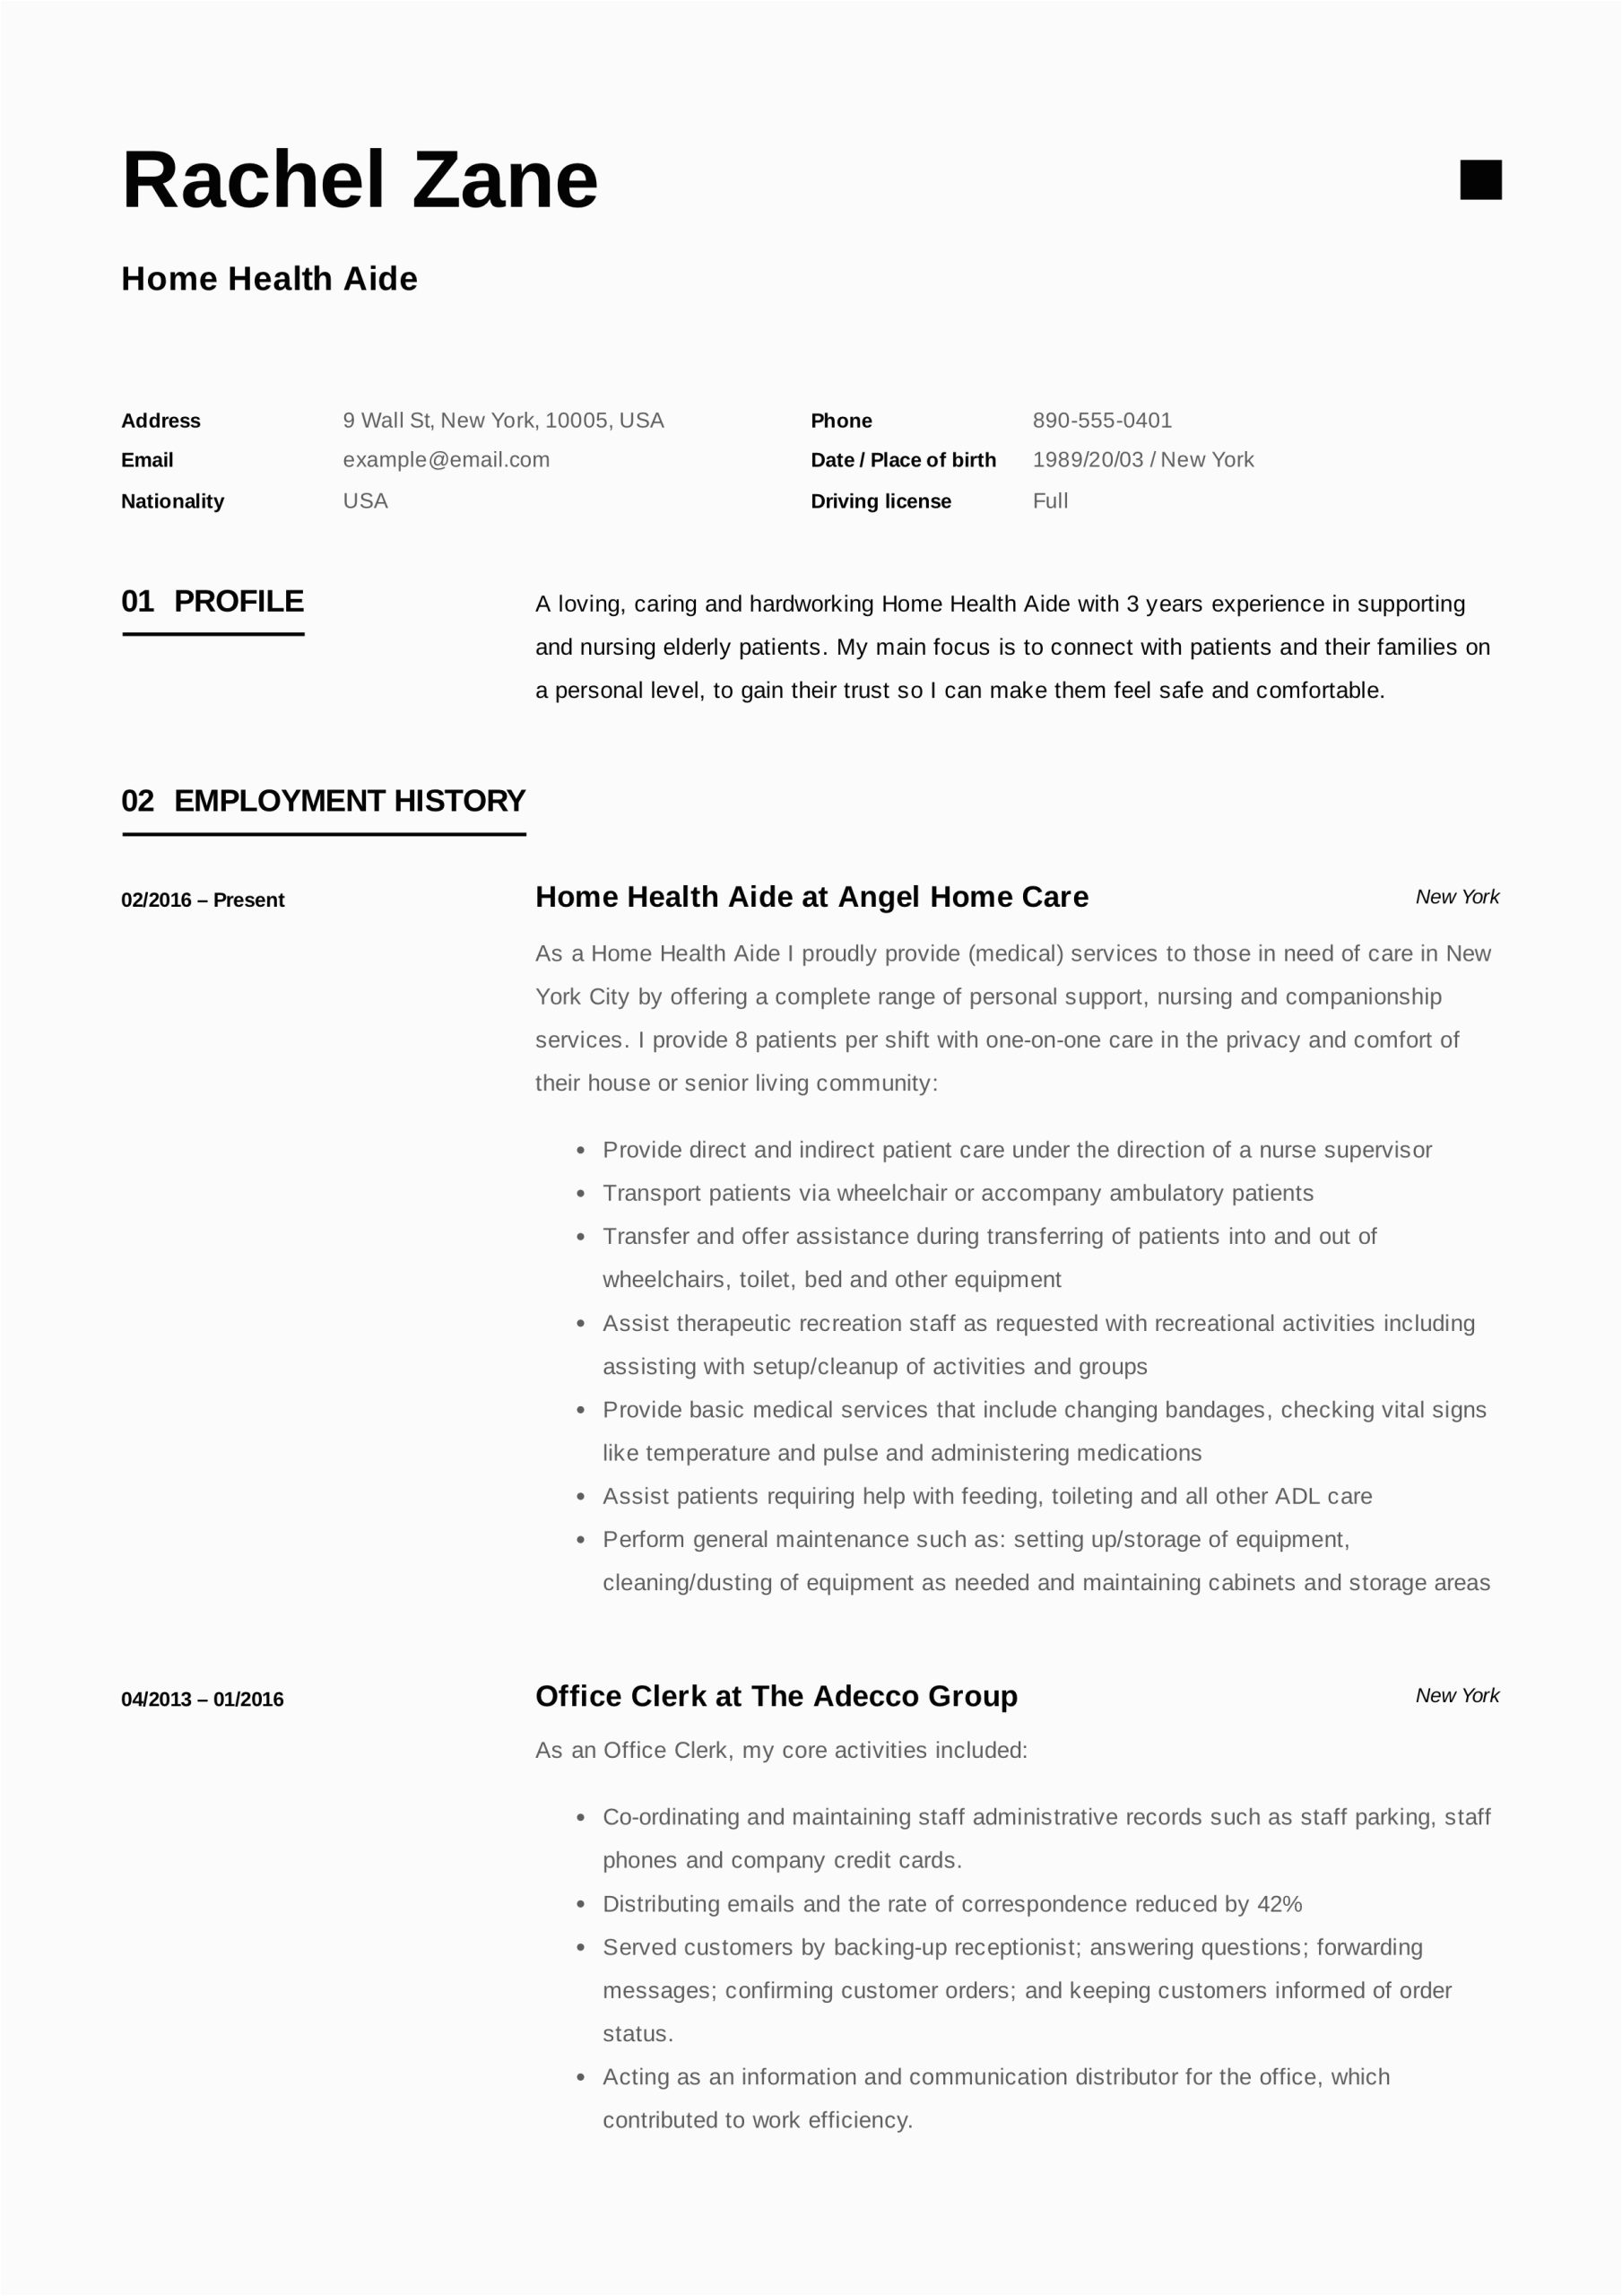 Sample Of Resume for Health Care Aide Home Health Aide Resume Sample & Writing Guide 12 Samples